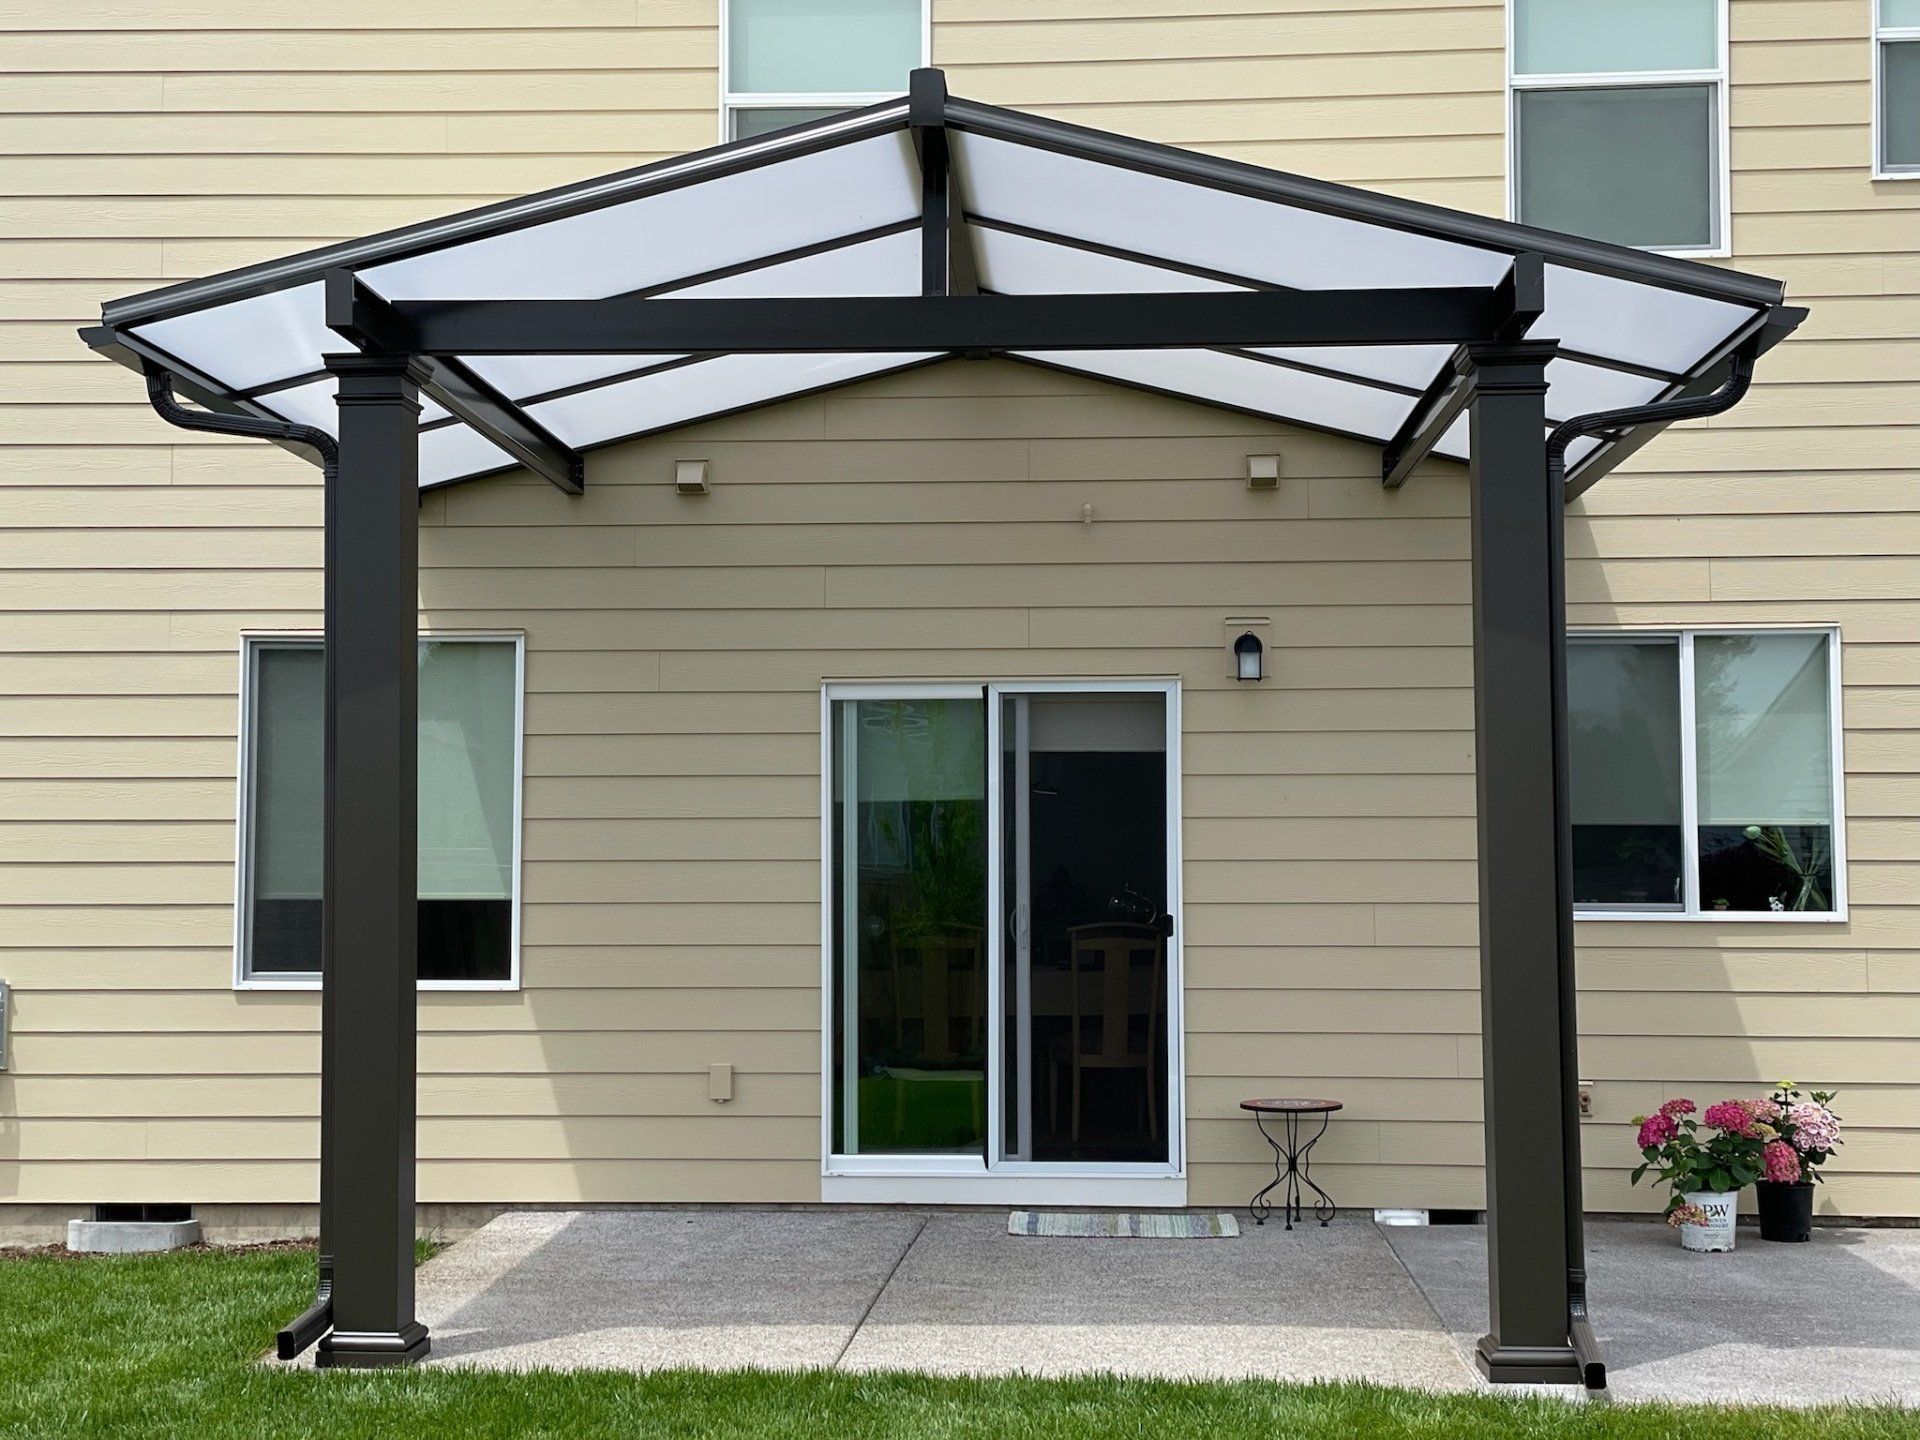 Patio Cover Contractor in Wilsonville - Crown Patio Covers Process